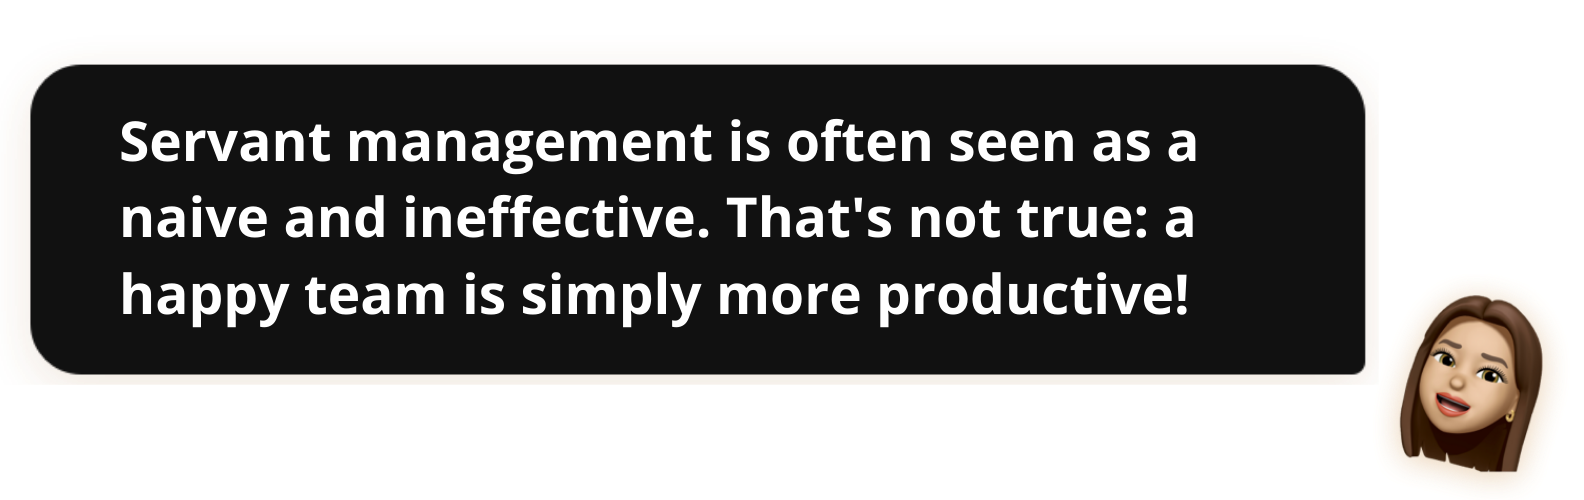 Servant management is often sees as naive and ineffective. That's not true: a happy team is simply more productive!